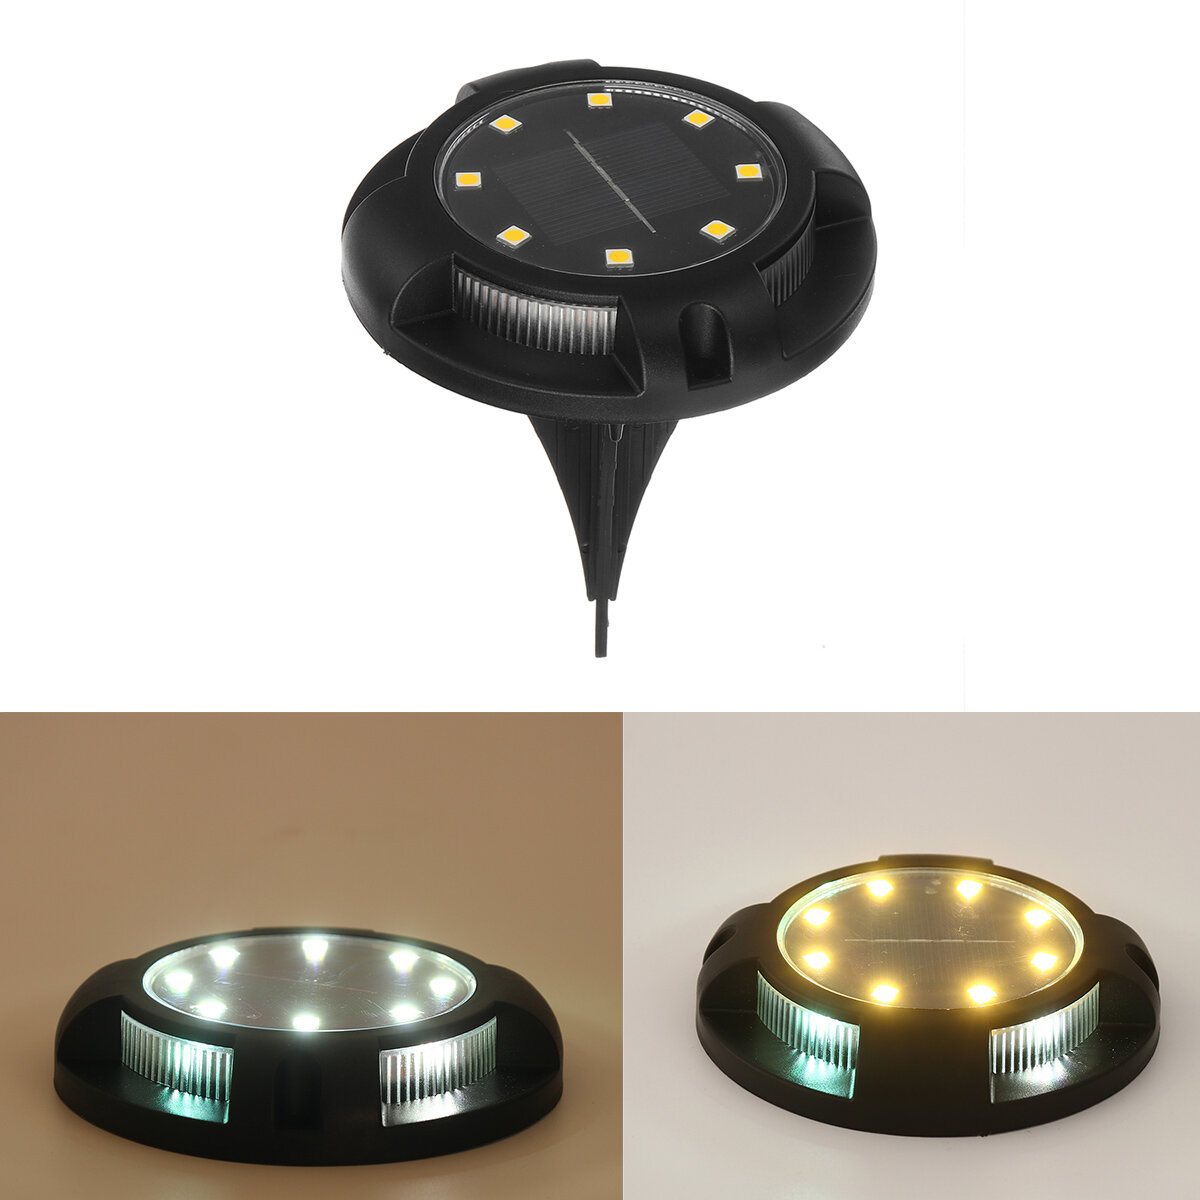 Details about   Solar Light RGB Colorful Ground Buried Garden Lawn 12LED Deck Outdoor Patio Lamp 